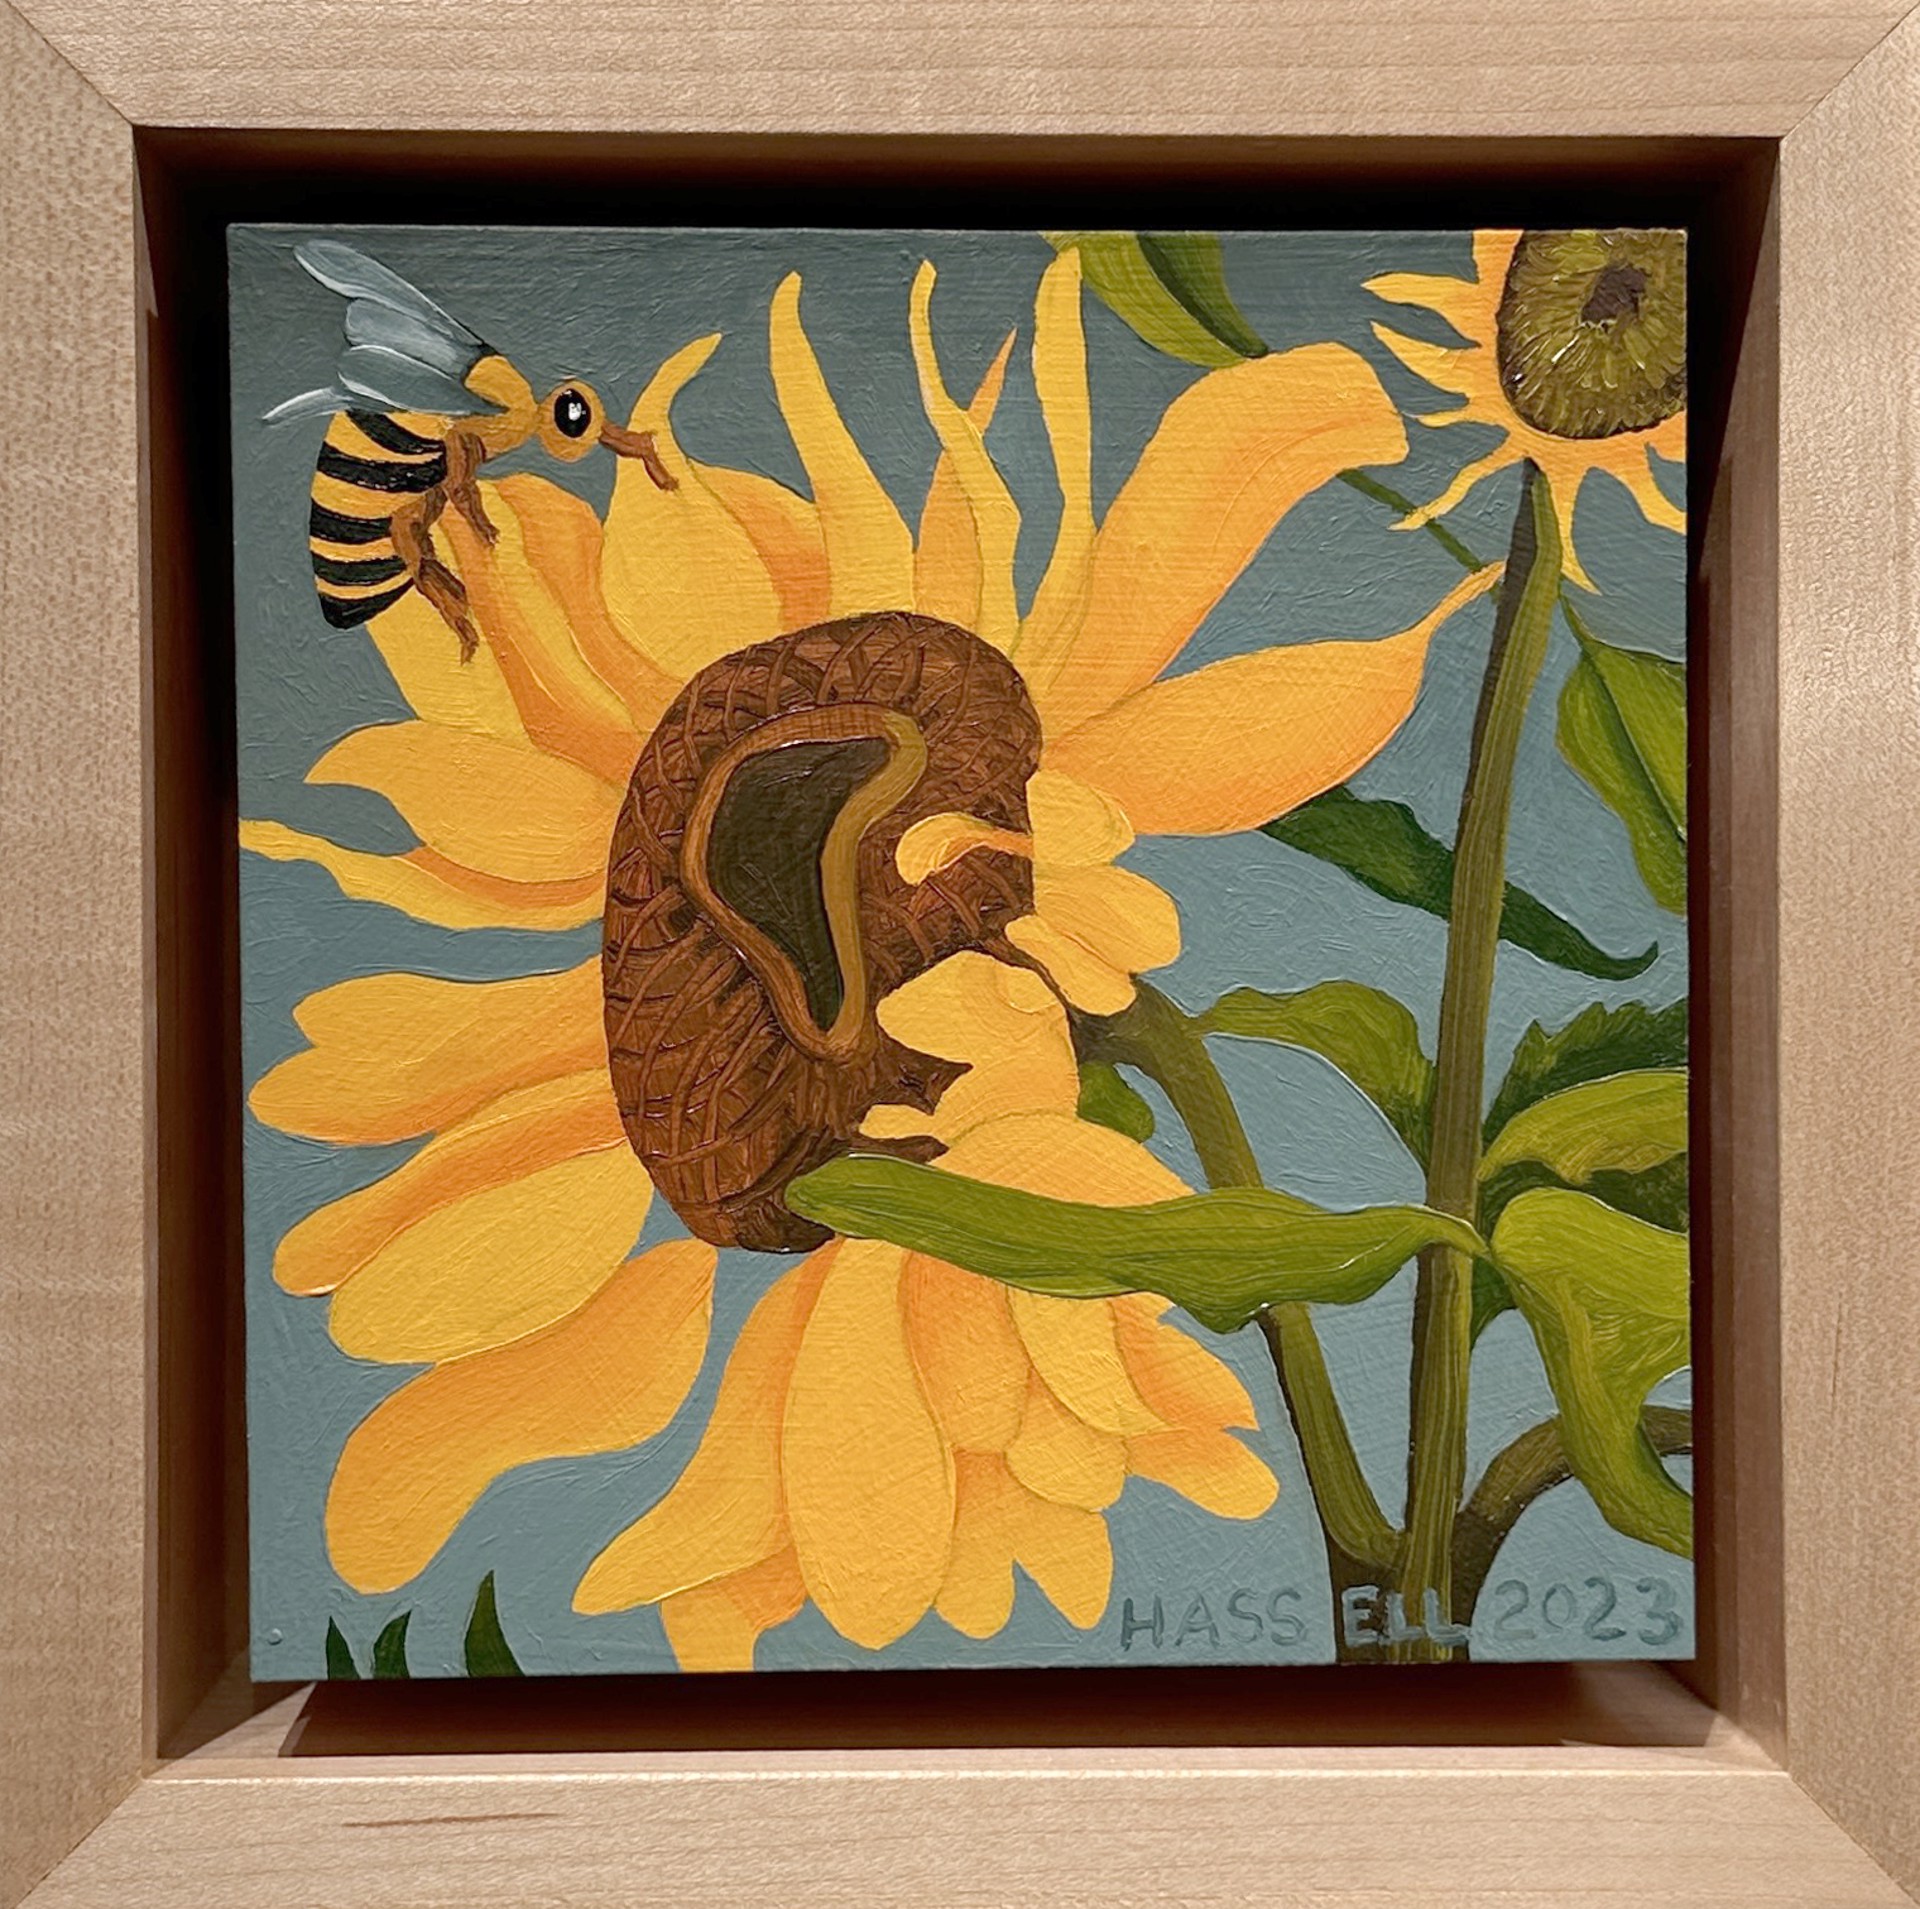 Sunflower with Honeybee by Billy Hassell